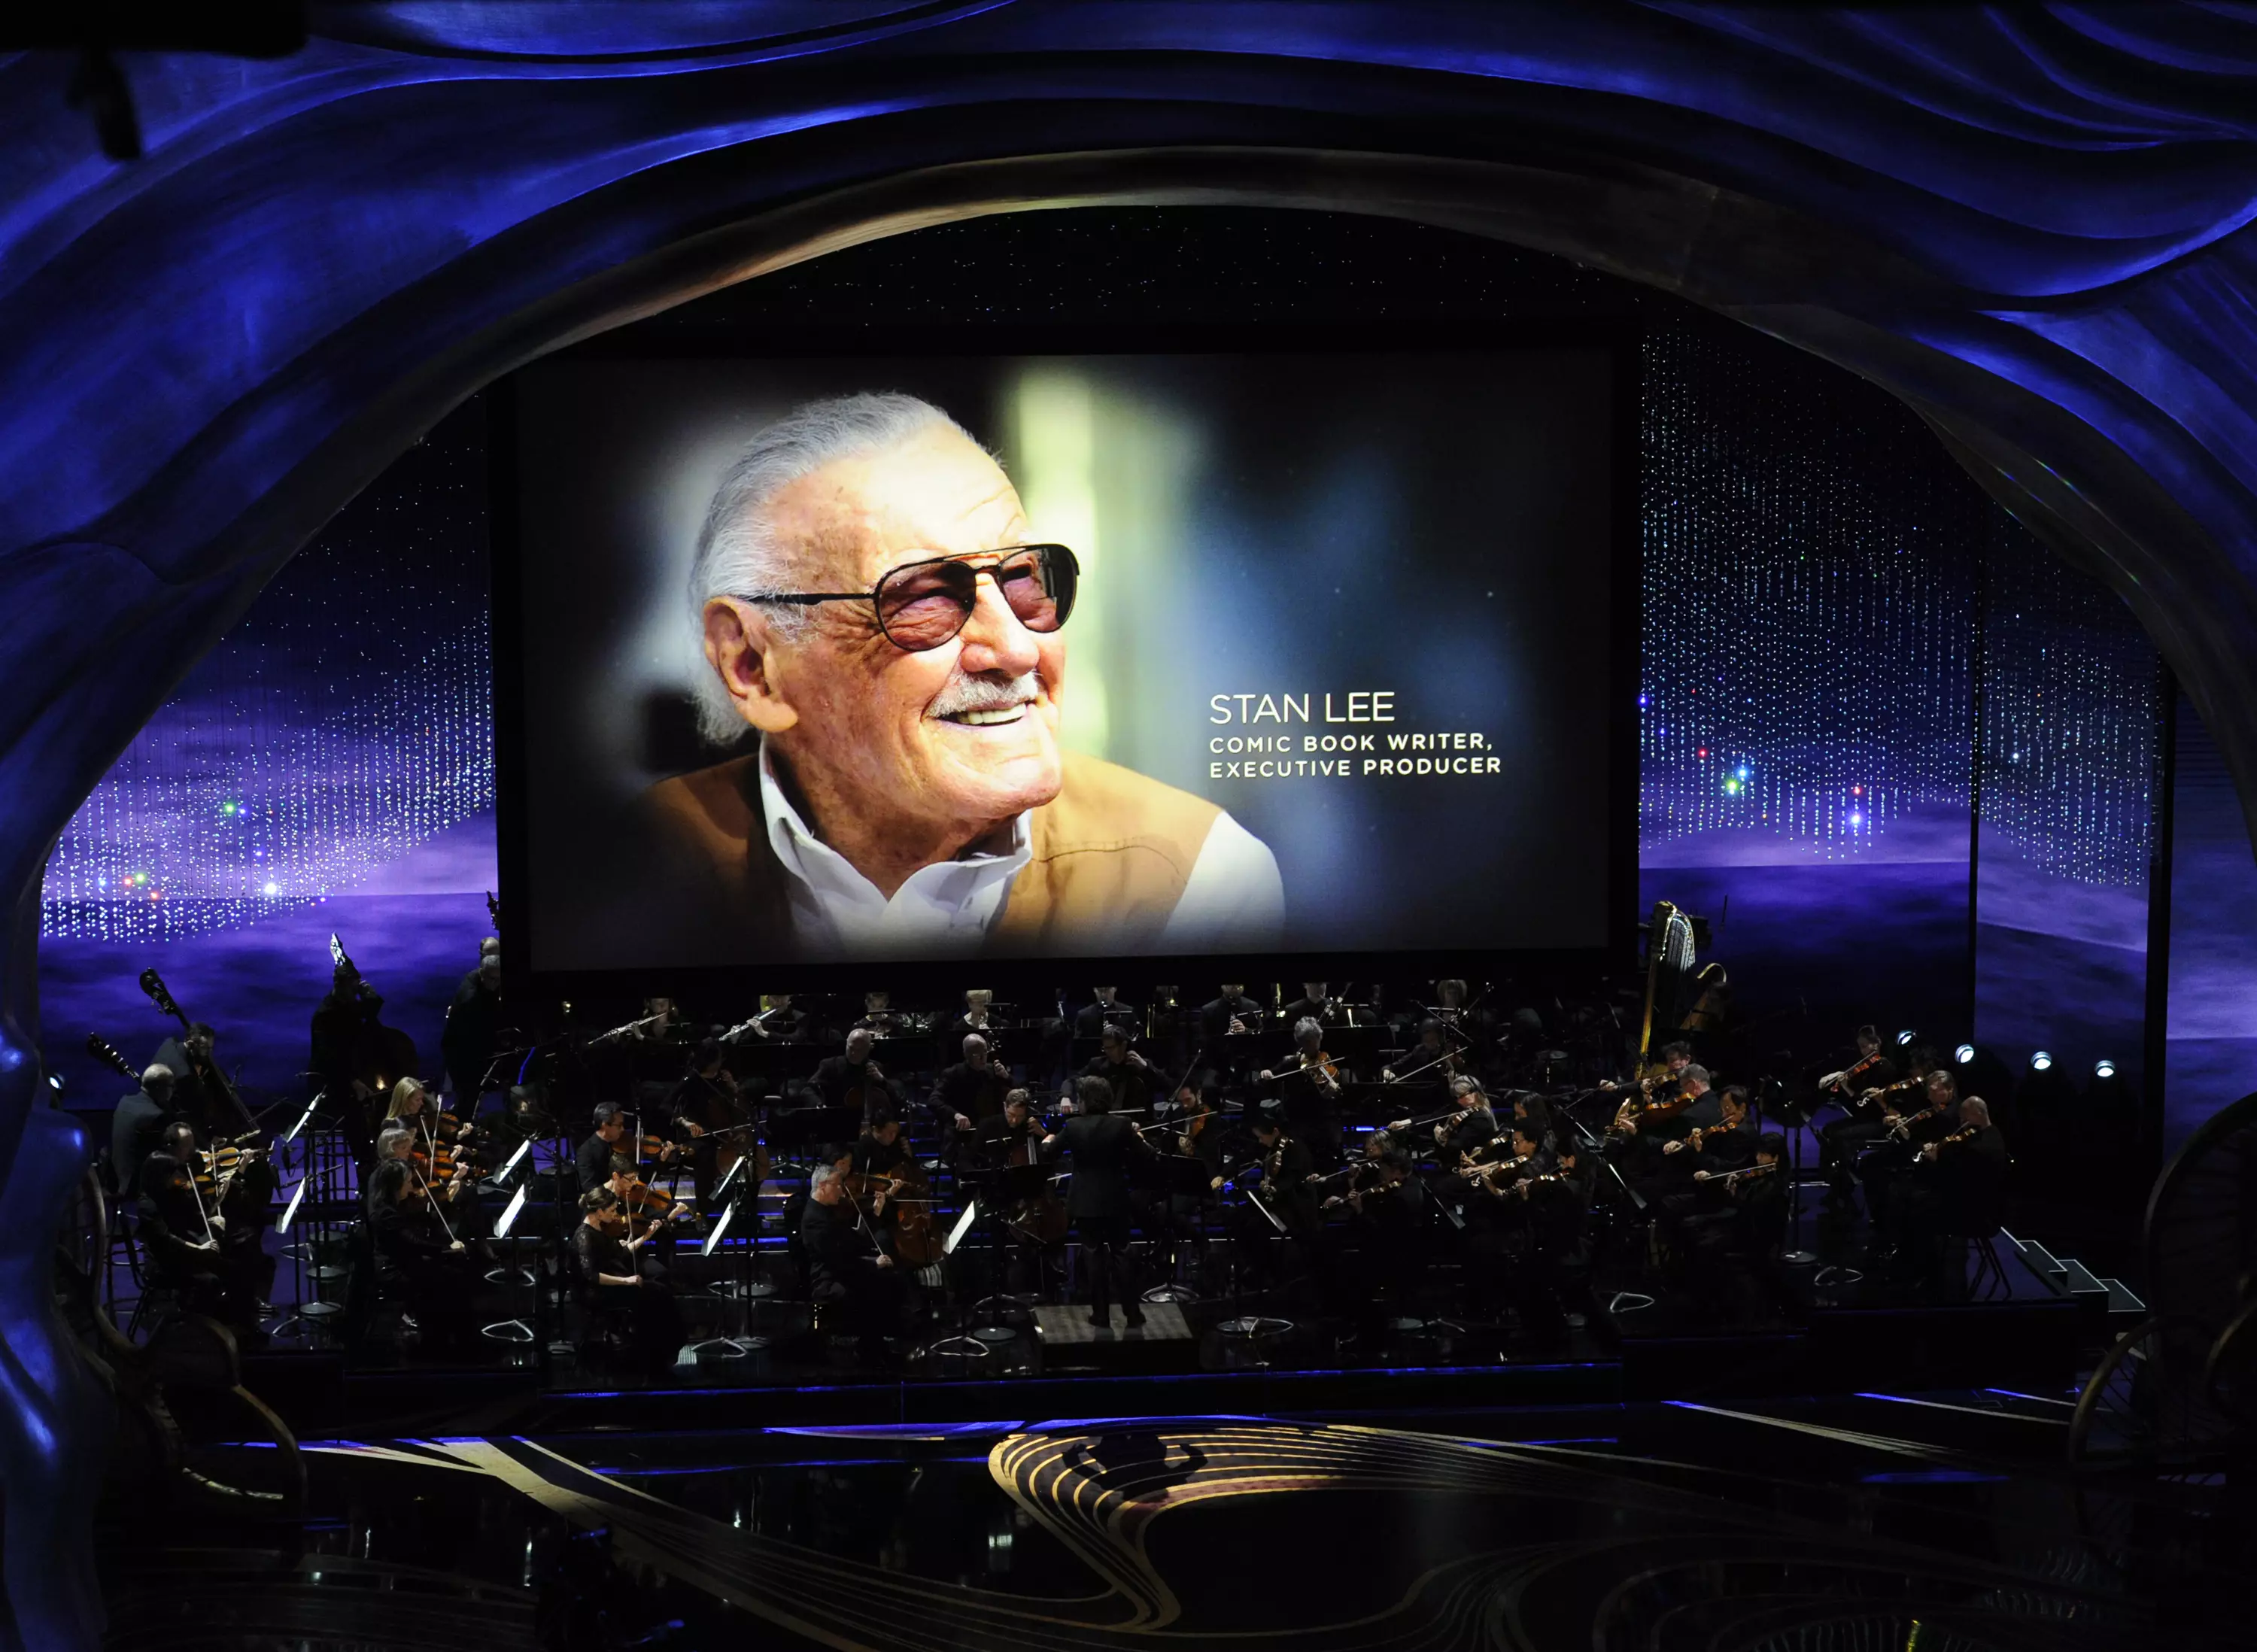 Stan Lee was included in the 'In Memoriam' section of the Oscars.